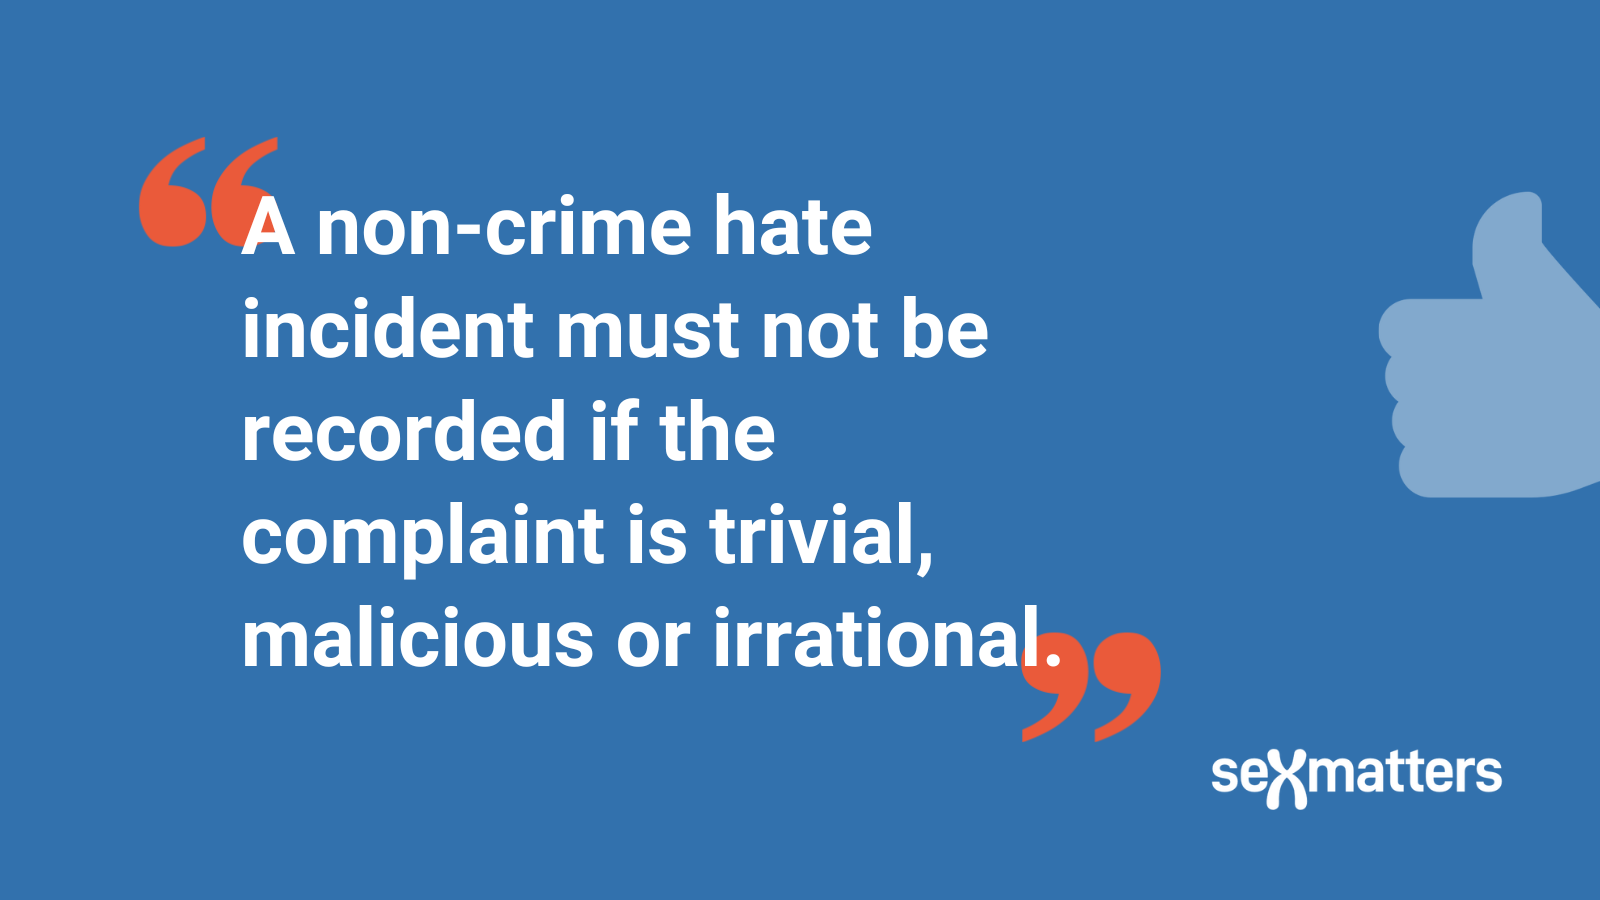 A non-crime hate incident must not be recorded if the complaint is trivial, malicious or irrational.